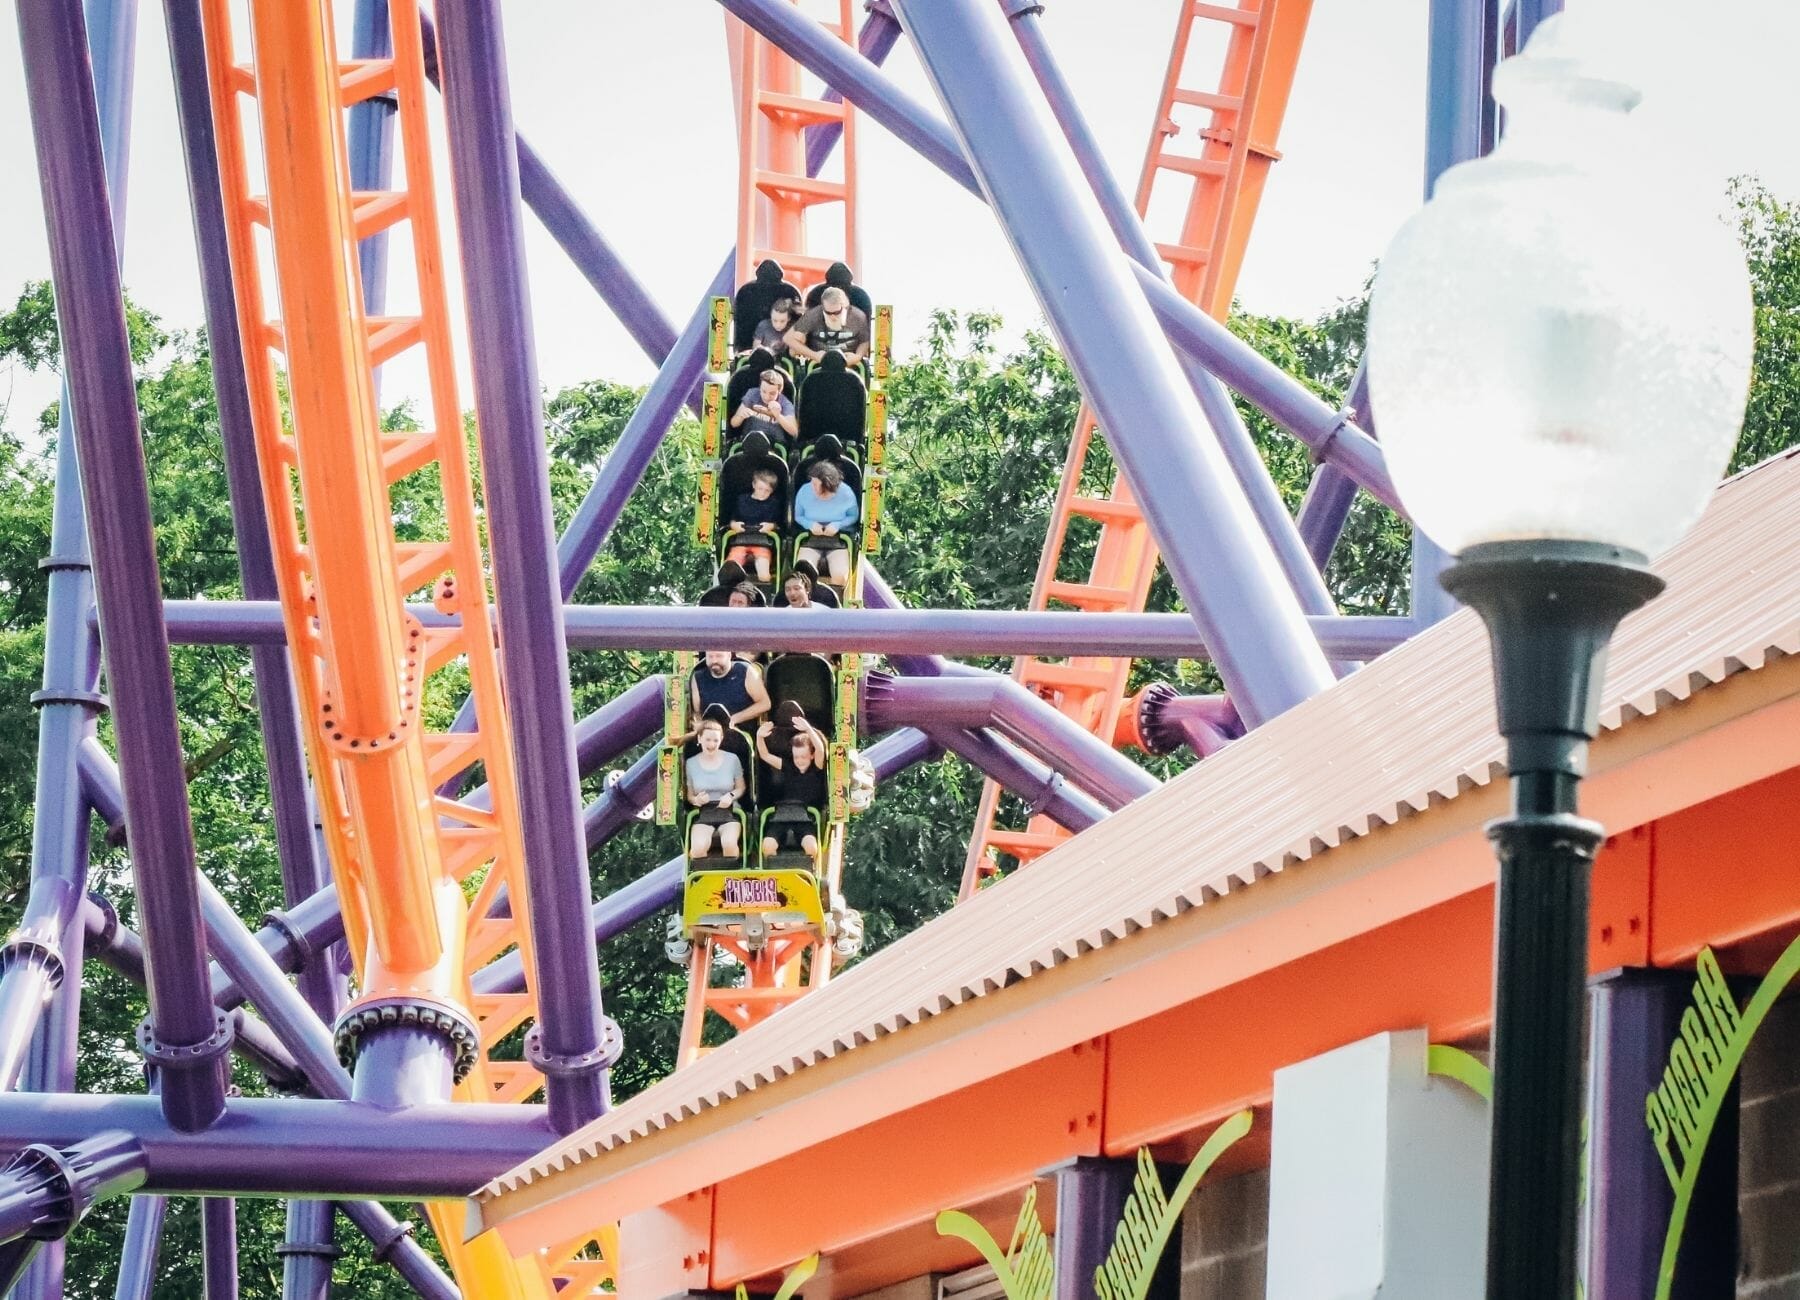 A 19-Story Six Flags Roller-Coaster Malfunctioned, Injuring 14 People